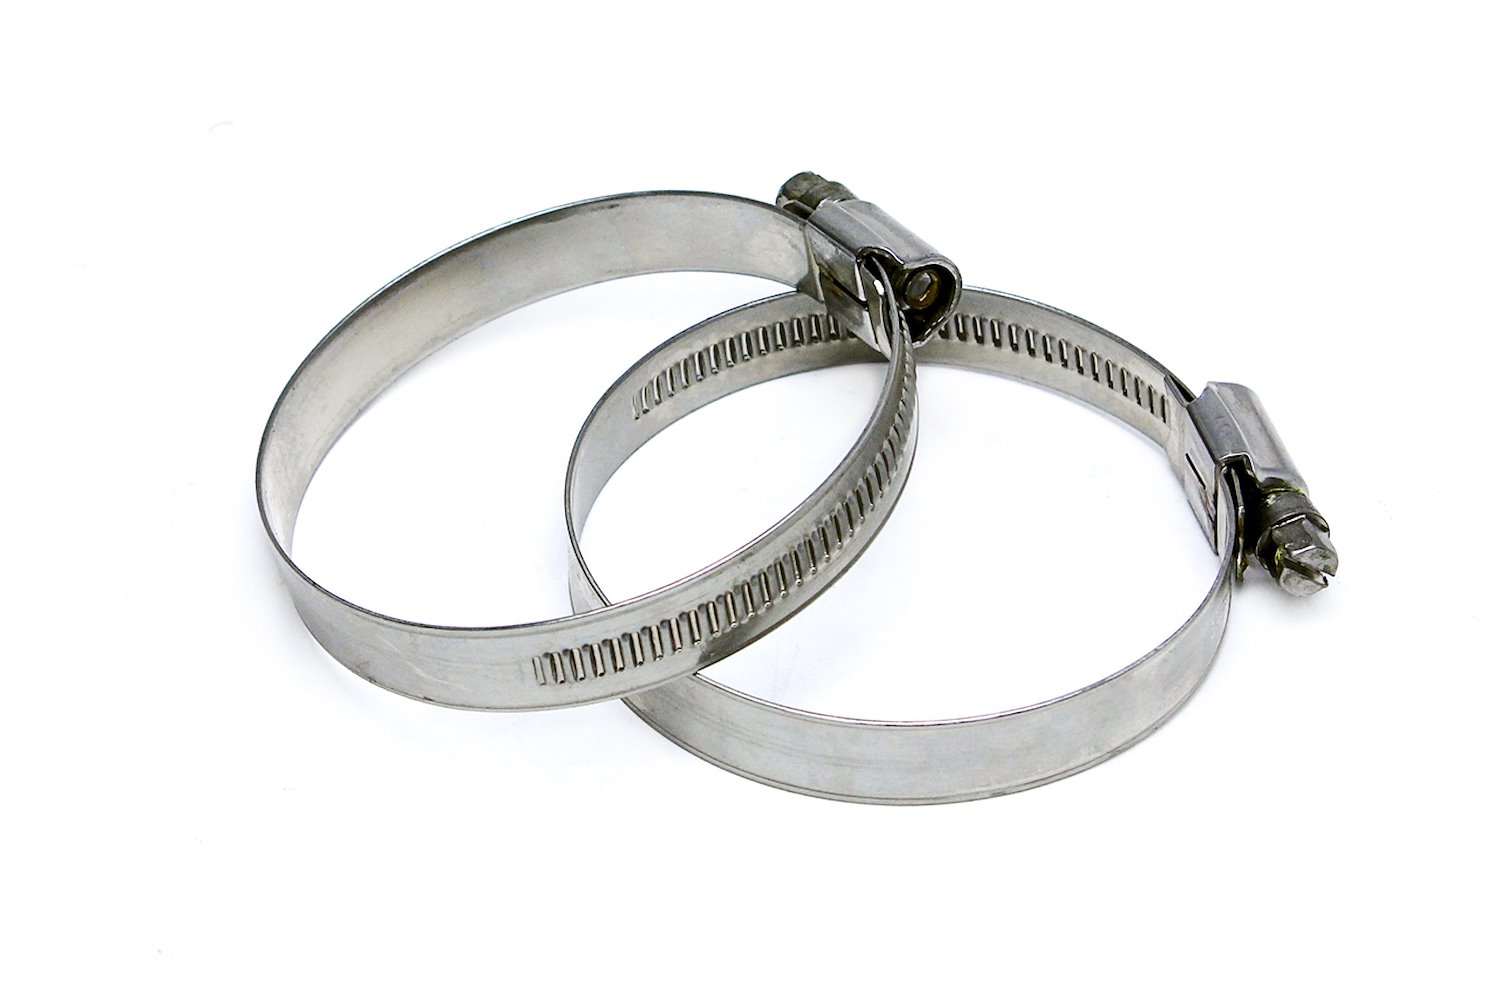 EMSC-120-140x2 Embossed Hose Clamp, Stainless Steel Embossed Hose Clamp, Size #80, Effective Range: 4-5/8 in.- 5-1/2 in., 2Pc